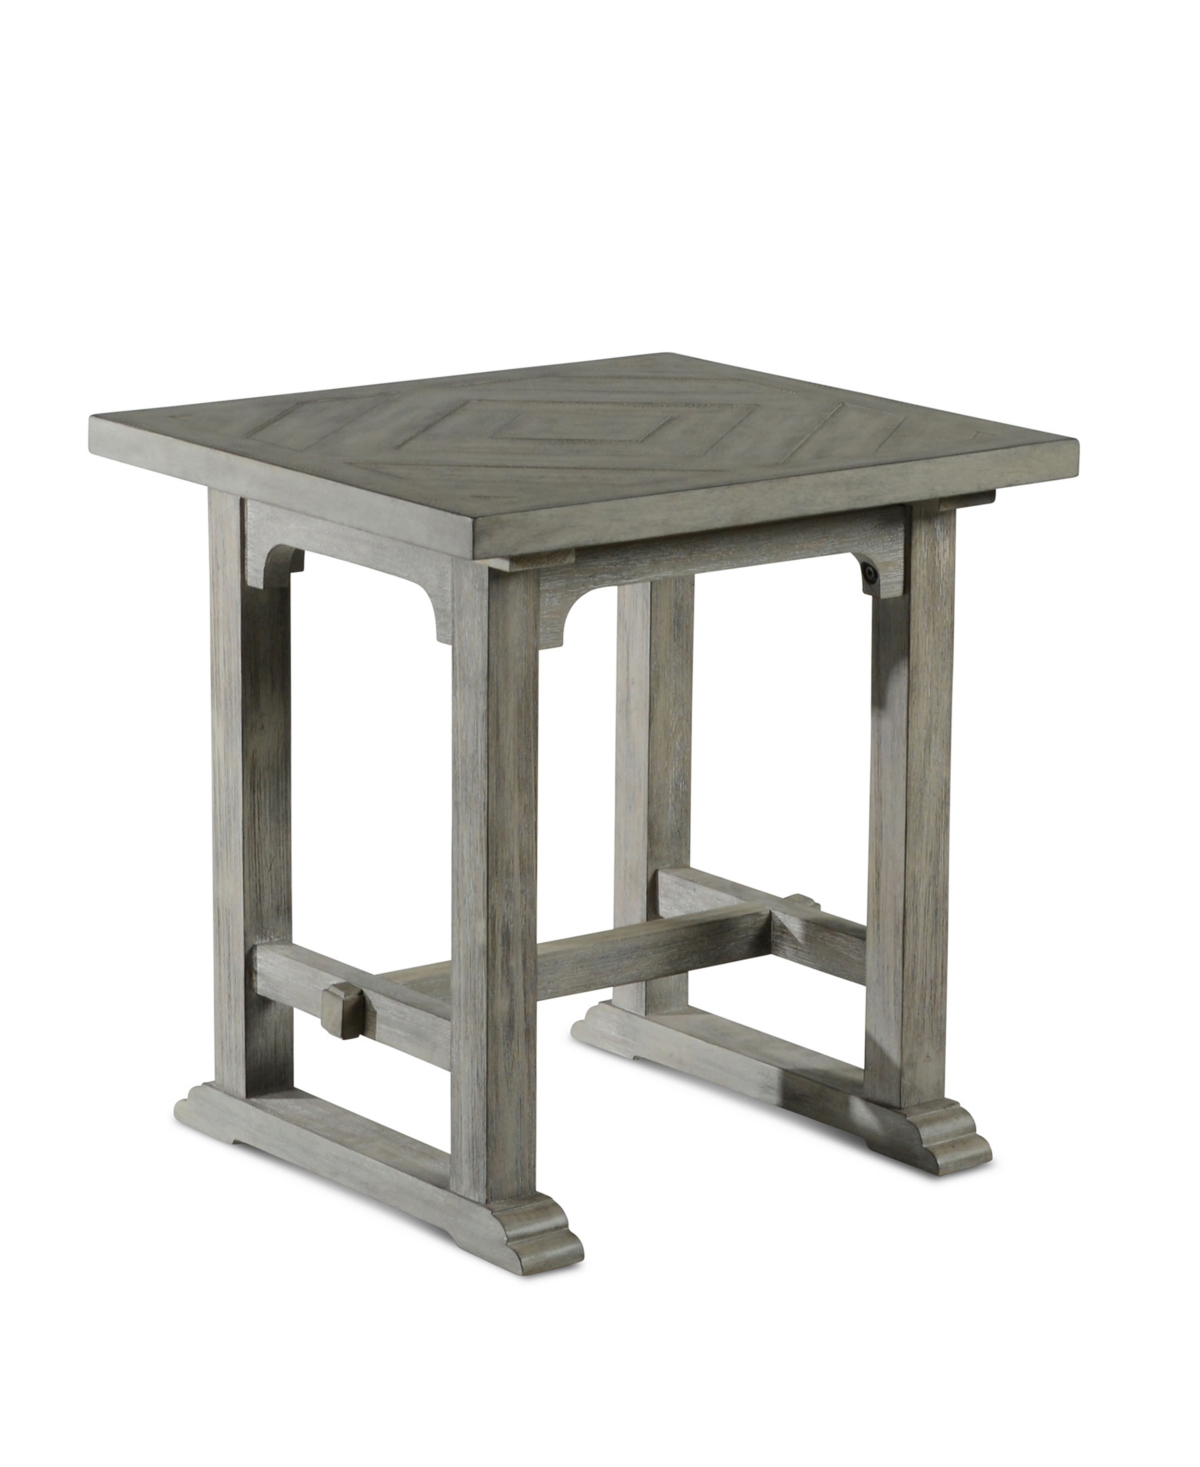 Steve Silver Whitford 24" Distressed Wood End Table In Dove Gray Finish